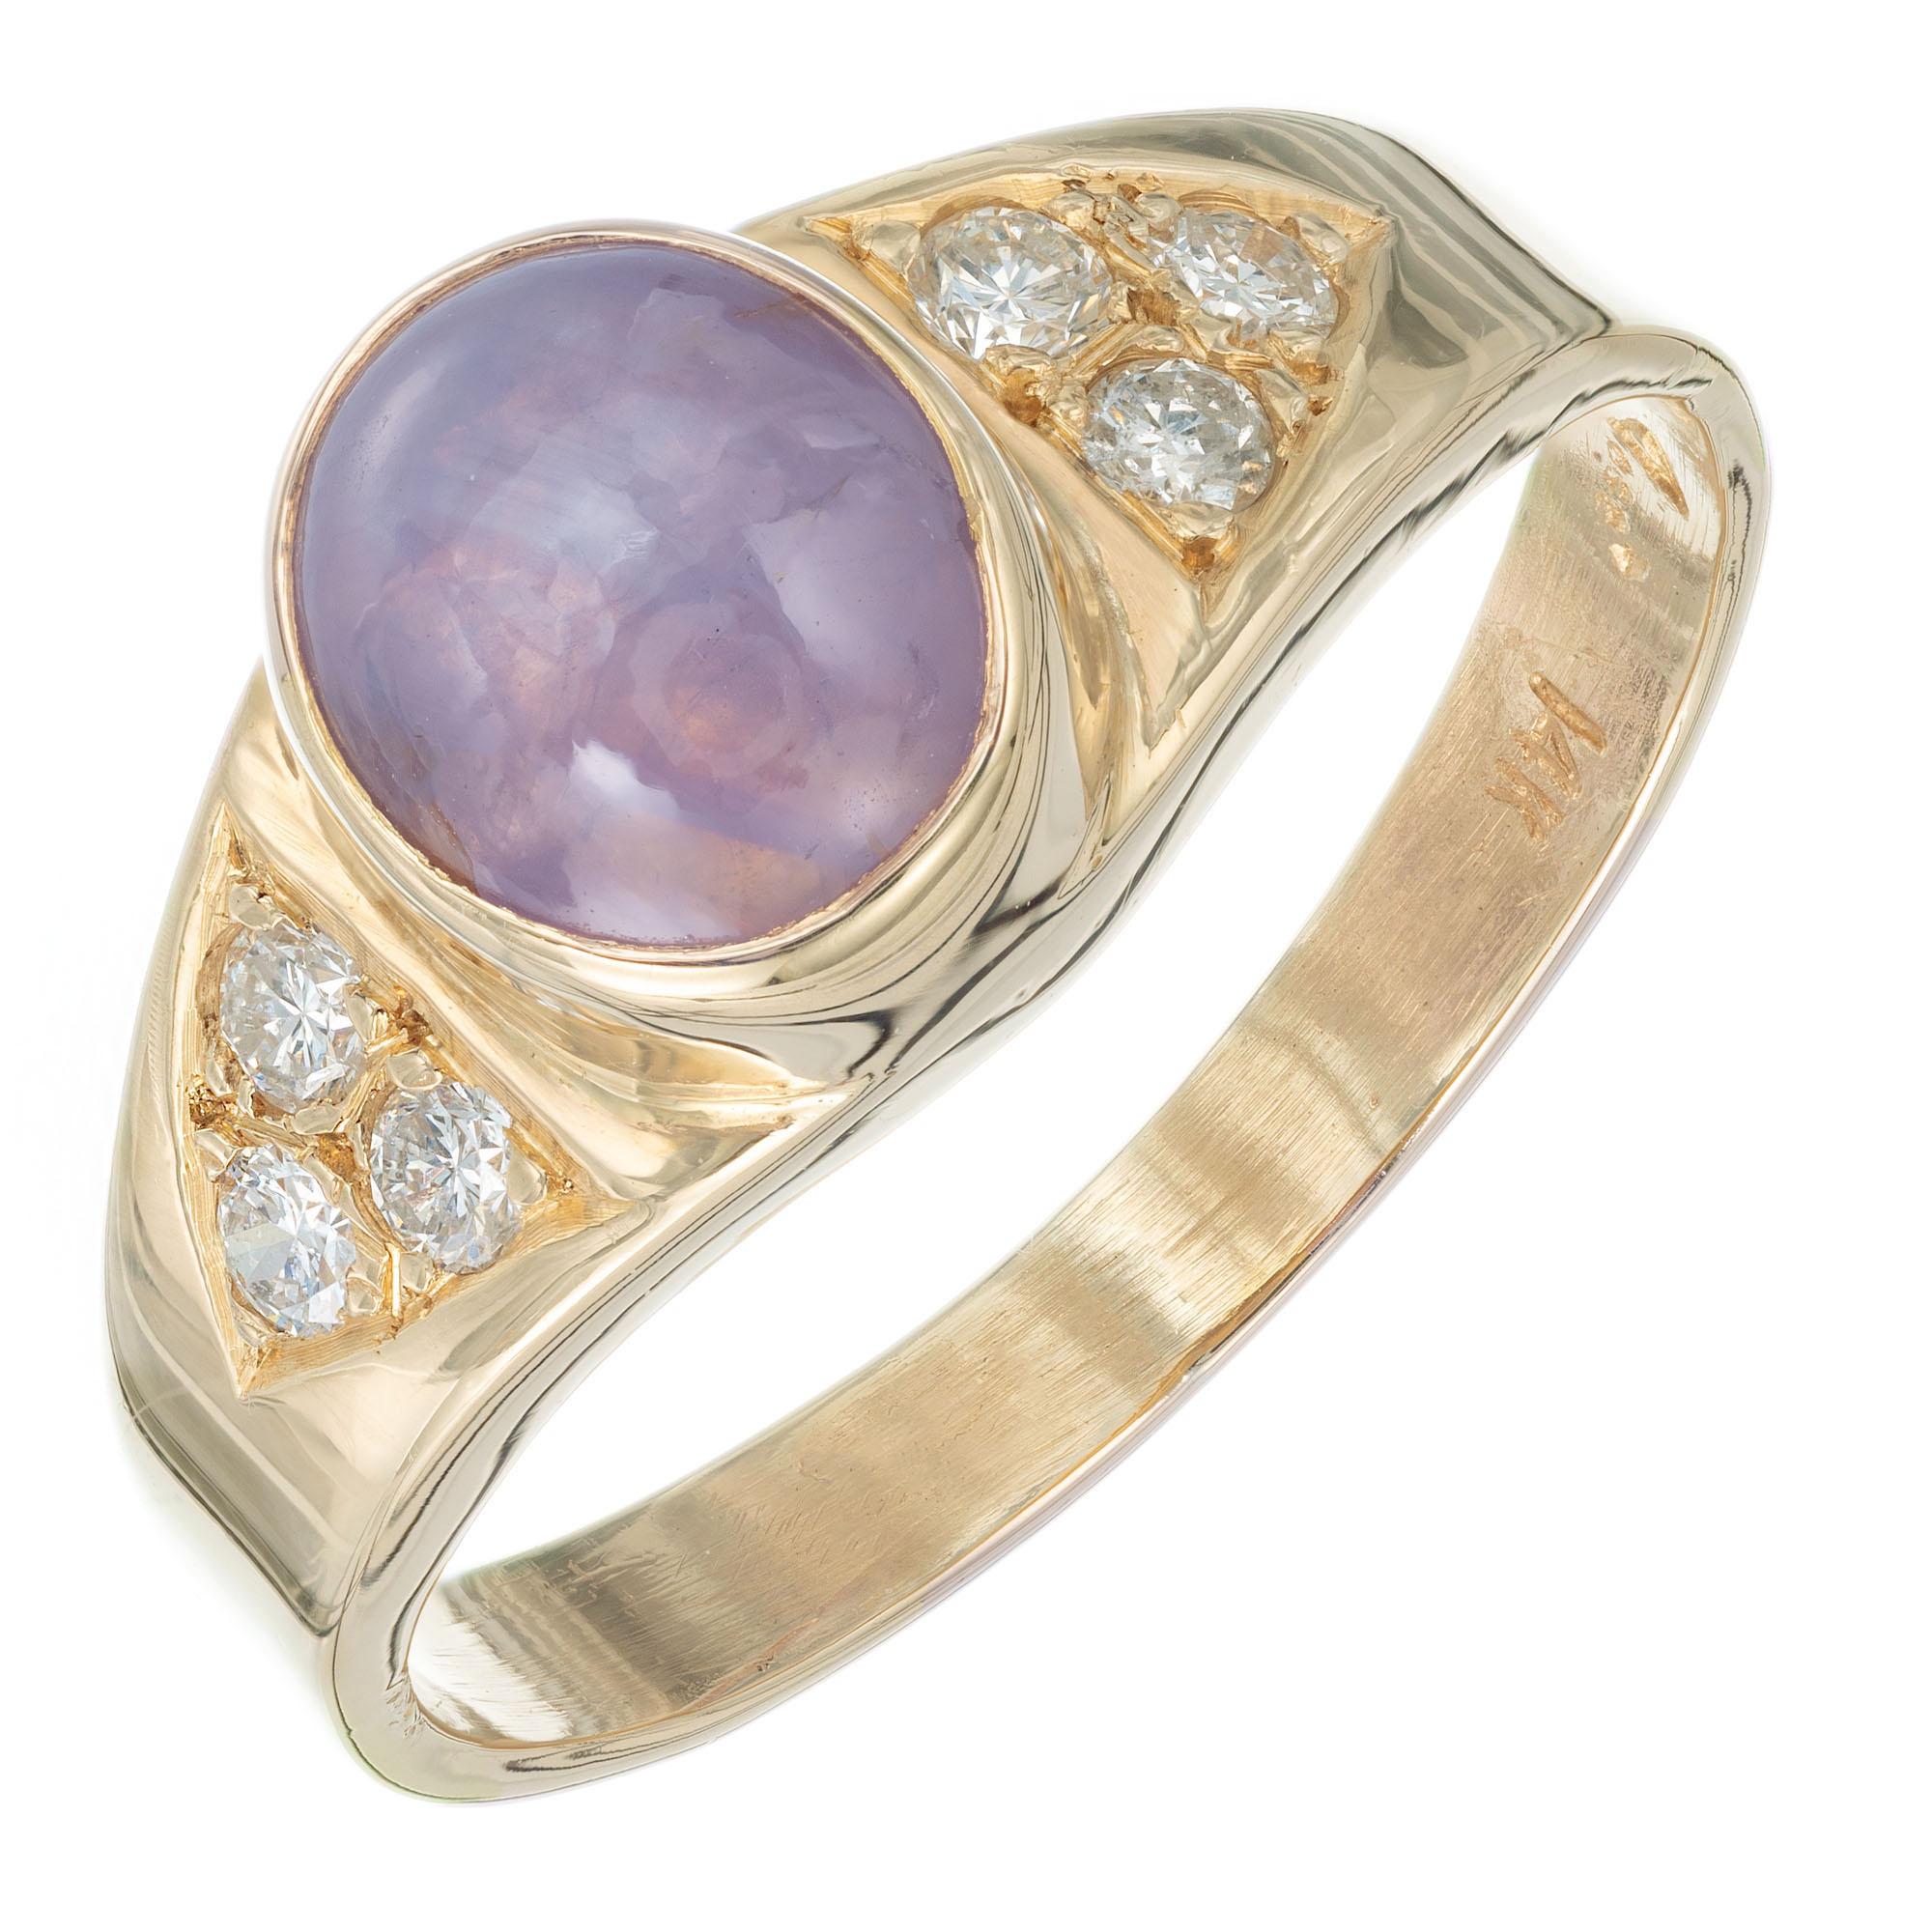 GIA certified natural untreated 2.38 carat star sapphire. Light violet color oval bezel set cabochon center stone in 14k yellow gold setting with 6 diamond accents. 

1 oval cabochon light violet star sapphire MJ, approx. 2.38cts GIA certificate #